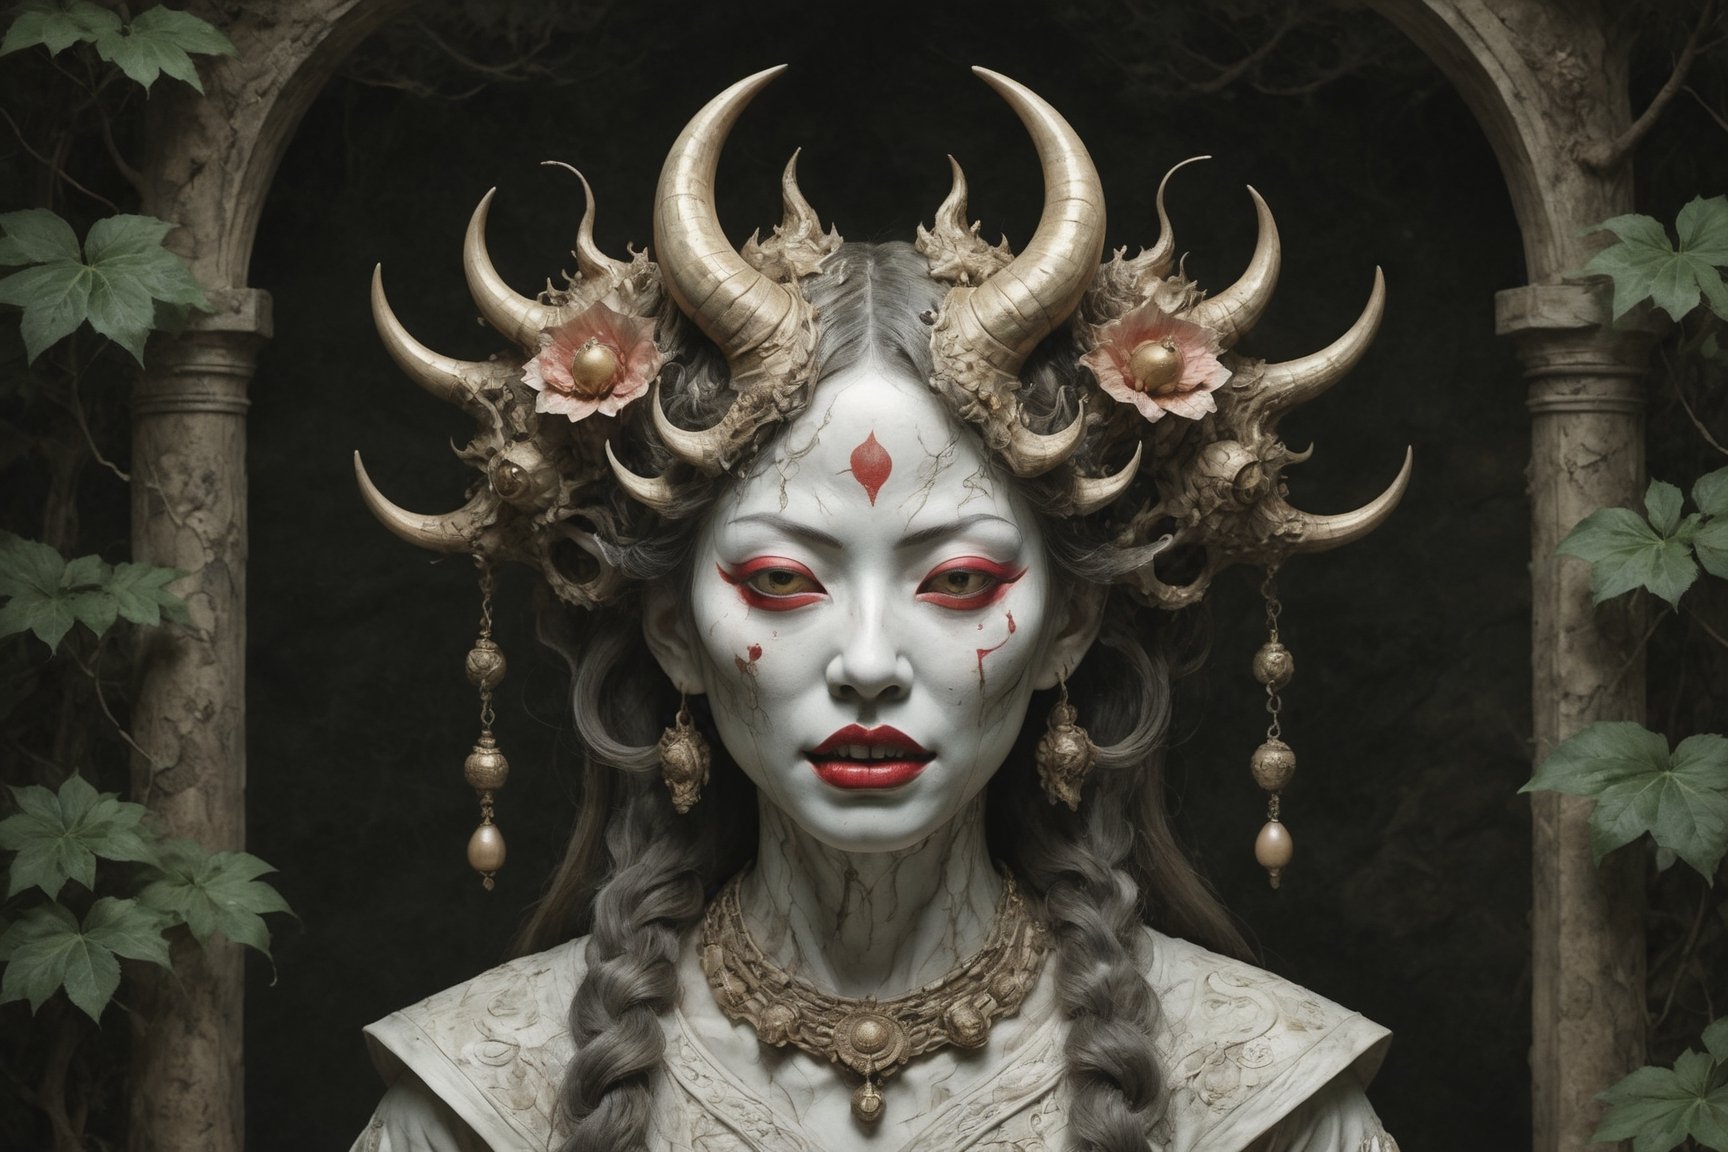 symmetrical portrait of surreal abandoned sculpture of white japanese female stunning Tengu (with a splashing coloration of Alberto Seveso and Basil Gogos), ((Wild crazy long hair)), dream - like heavy mysterious atmosphere,in an abandoned japanese overgrown shrine, perfect composition,beautiful detailed intricate insanely detailed octane,unreal engine 5,8k artistic photography,photo realistic,soft natural volumetric cinematic perfect light,chiaroscuro,award - winning photography, ((tsutomu nihei, Bastien Lecouffe Deharme,  iris van herpen and wangechi Mutu)), art forms of nature by ernst haeckel,  art nouveau,  symbolist,  Kinetic Art,  visionary,  gothic,  (((ancient japanese mythical being, Tengu with horns and shapr demon teeth:1.4))),  neo - gothic,  pre - raphaelite,  fractal lace, intricate mythical botanical,  ai biodiversity,  surrealism,  hyper detailed ultra sharp octane render,  (Audrey Kawasaki,  Anna Dittmann:1.4),  known for their captivating and atmospheric pieces. The overall effect of the image is ethereal,  as if the woman is enveloped in glowing stardust created expertly by artist W. Zelmer. The image is of exceptional quality,  showcasing the fine details and masterful blending of colors, folklore, ,on parchment